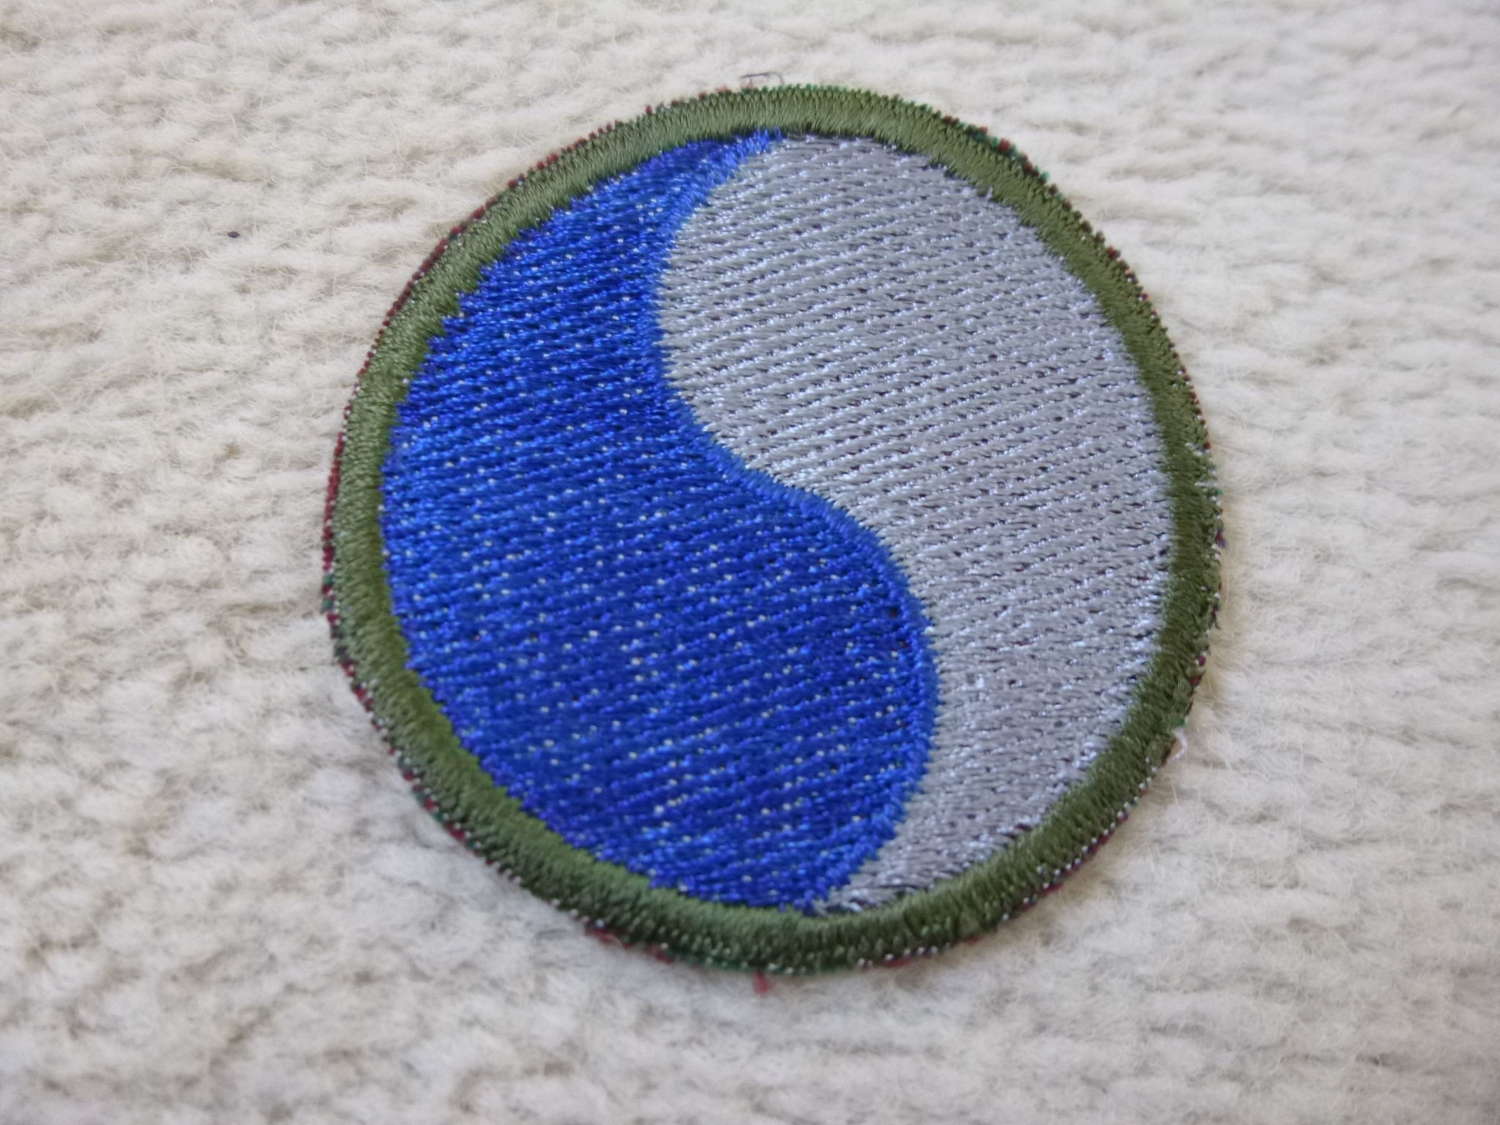 US Army 29th infantry division patch